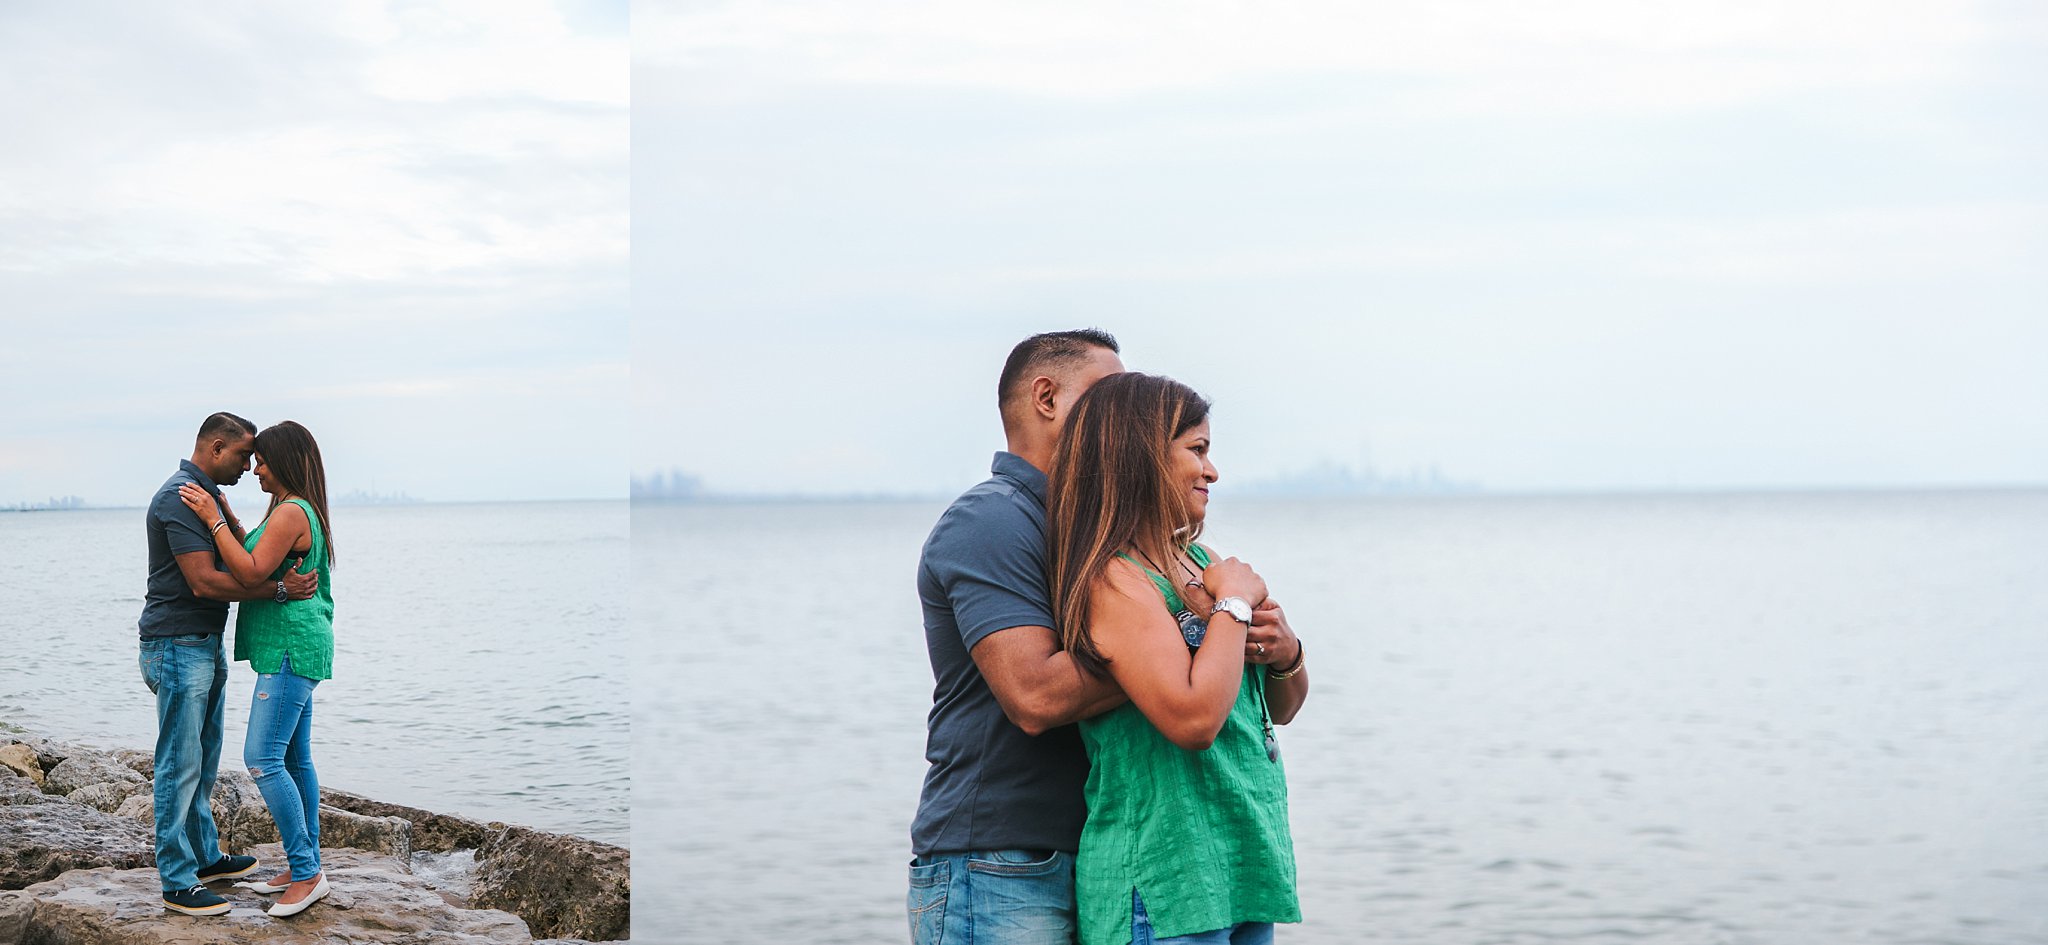 Jennifer Blaak Photography, Toronto Wedding Photographer, Engagement Session at Jack Darling Memorial Park in Mississauga, Couple on Rocks by lake